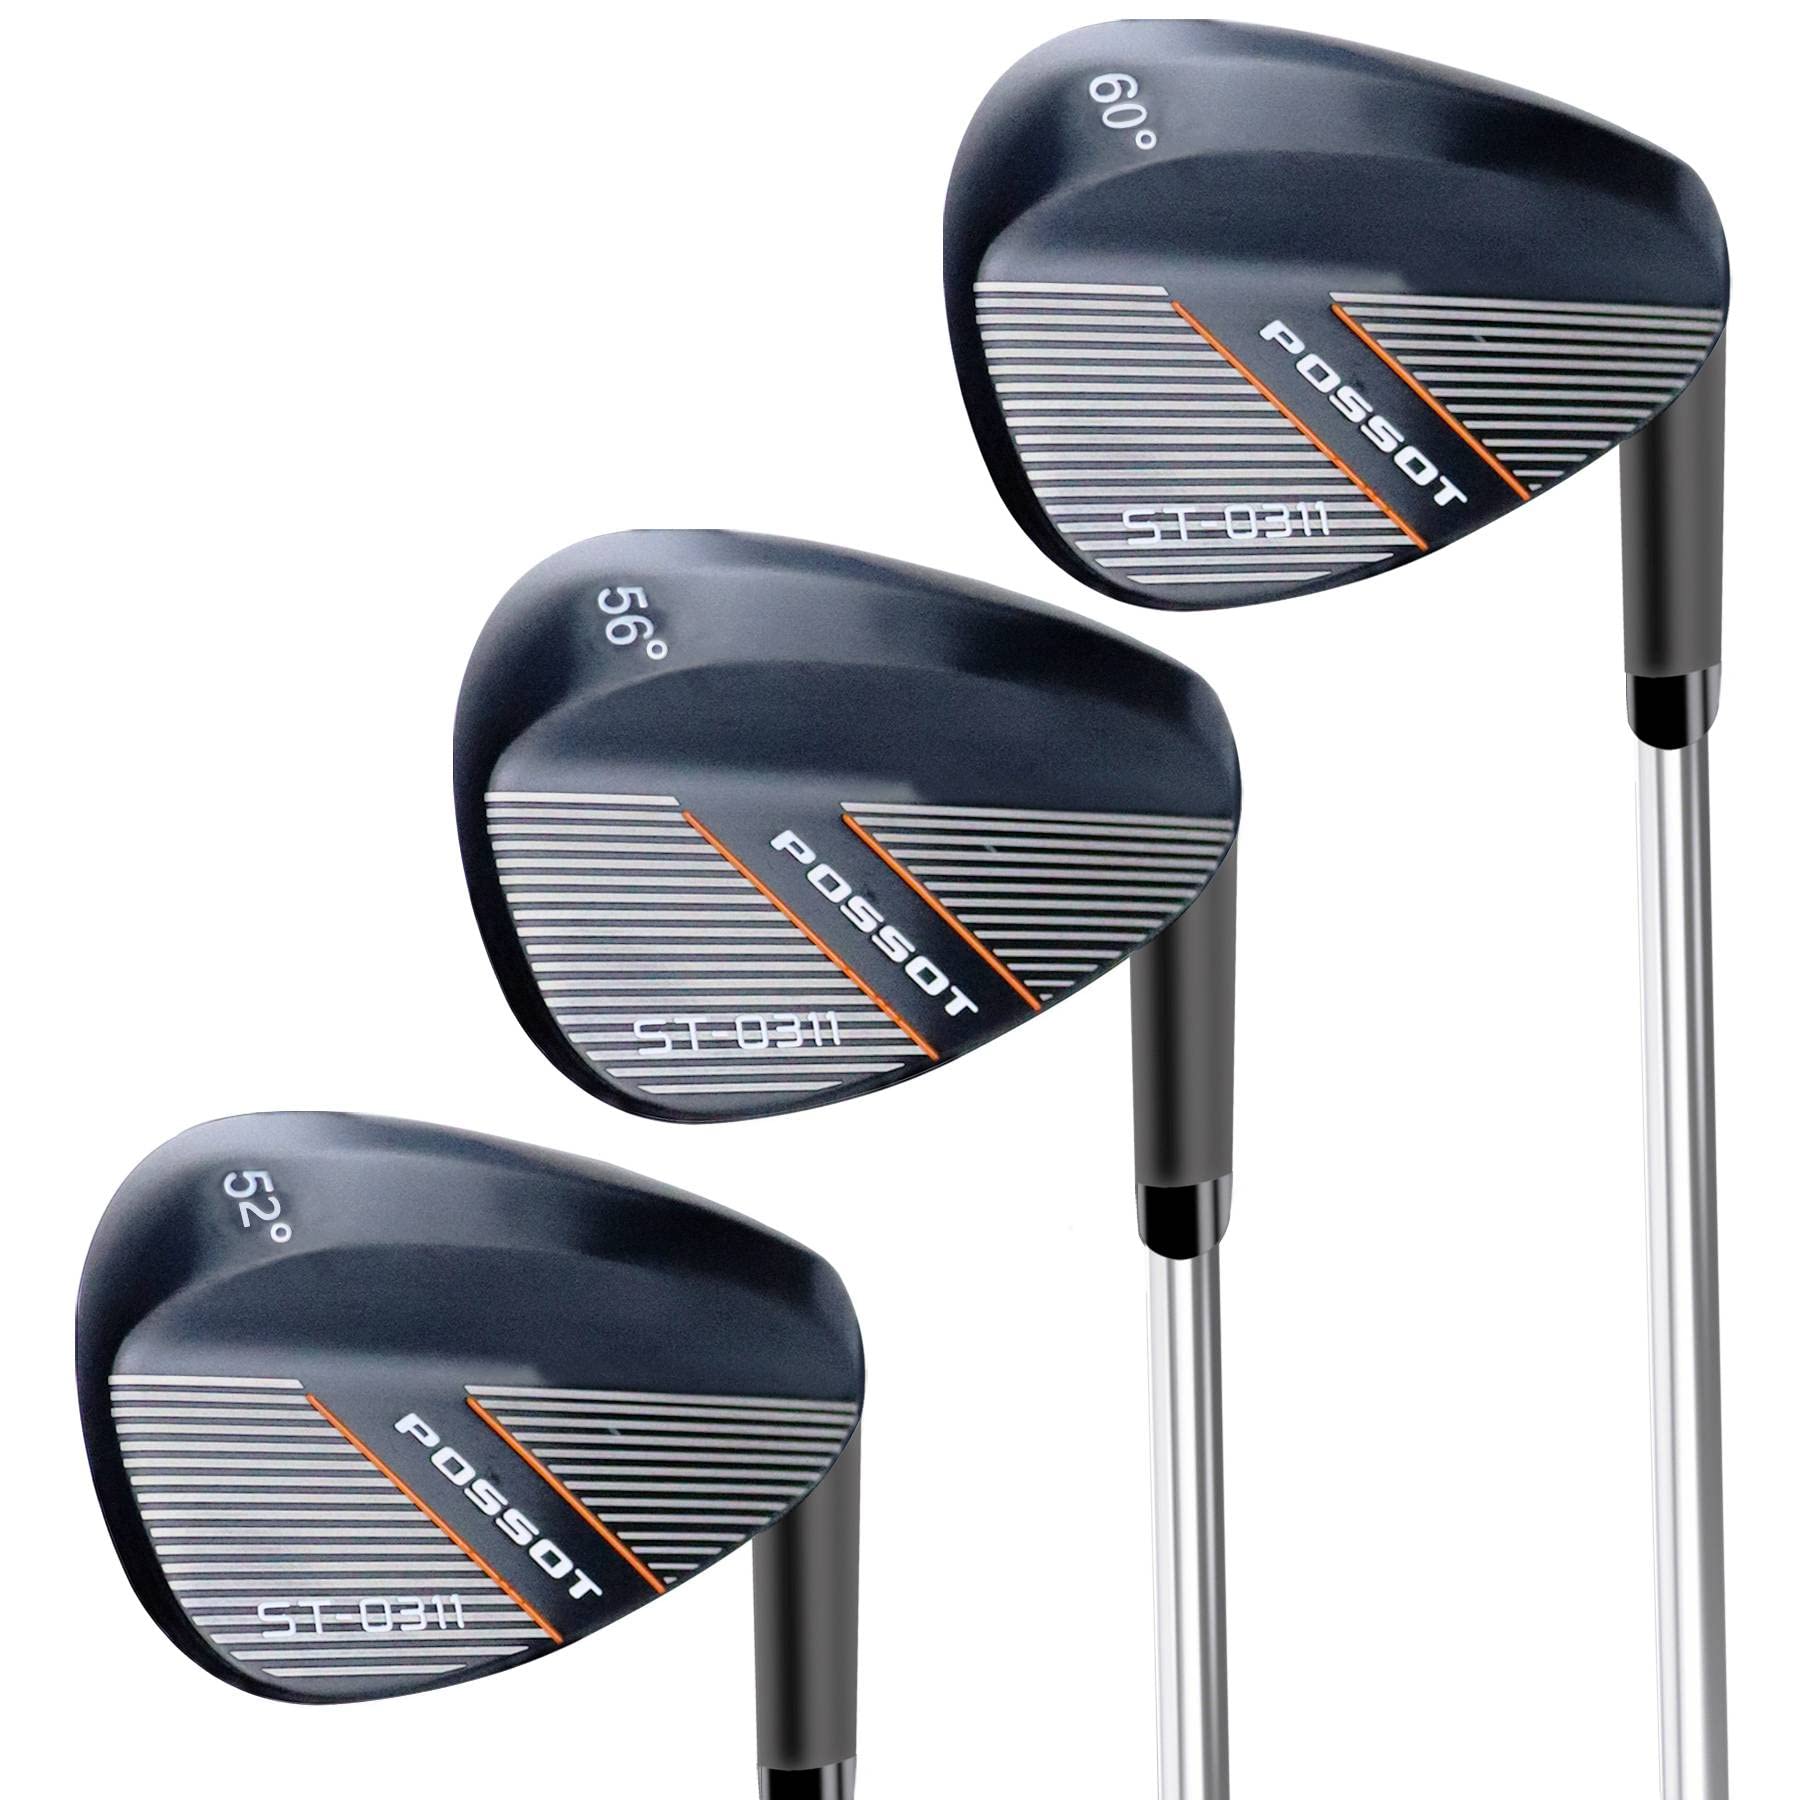 POSSOT 3 PCS Wedge Set or Individual Golf Wedges, Available in 52° Gap Wedge, 56° Sand Wedge and 60° Lob Wedge for Man and Woman Right Hand, Deeper Grooves for Mixer Spin